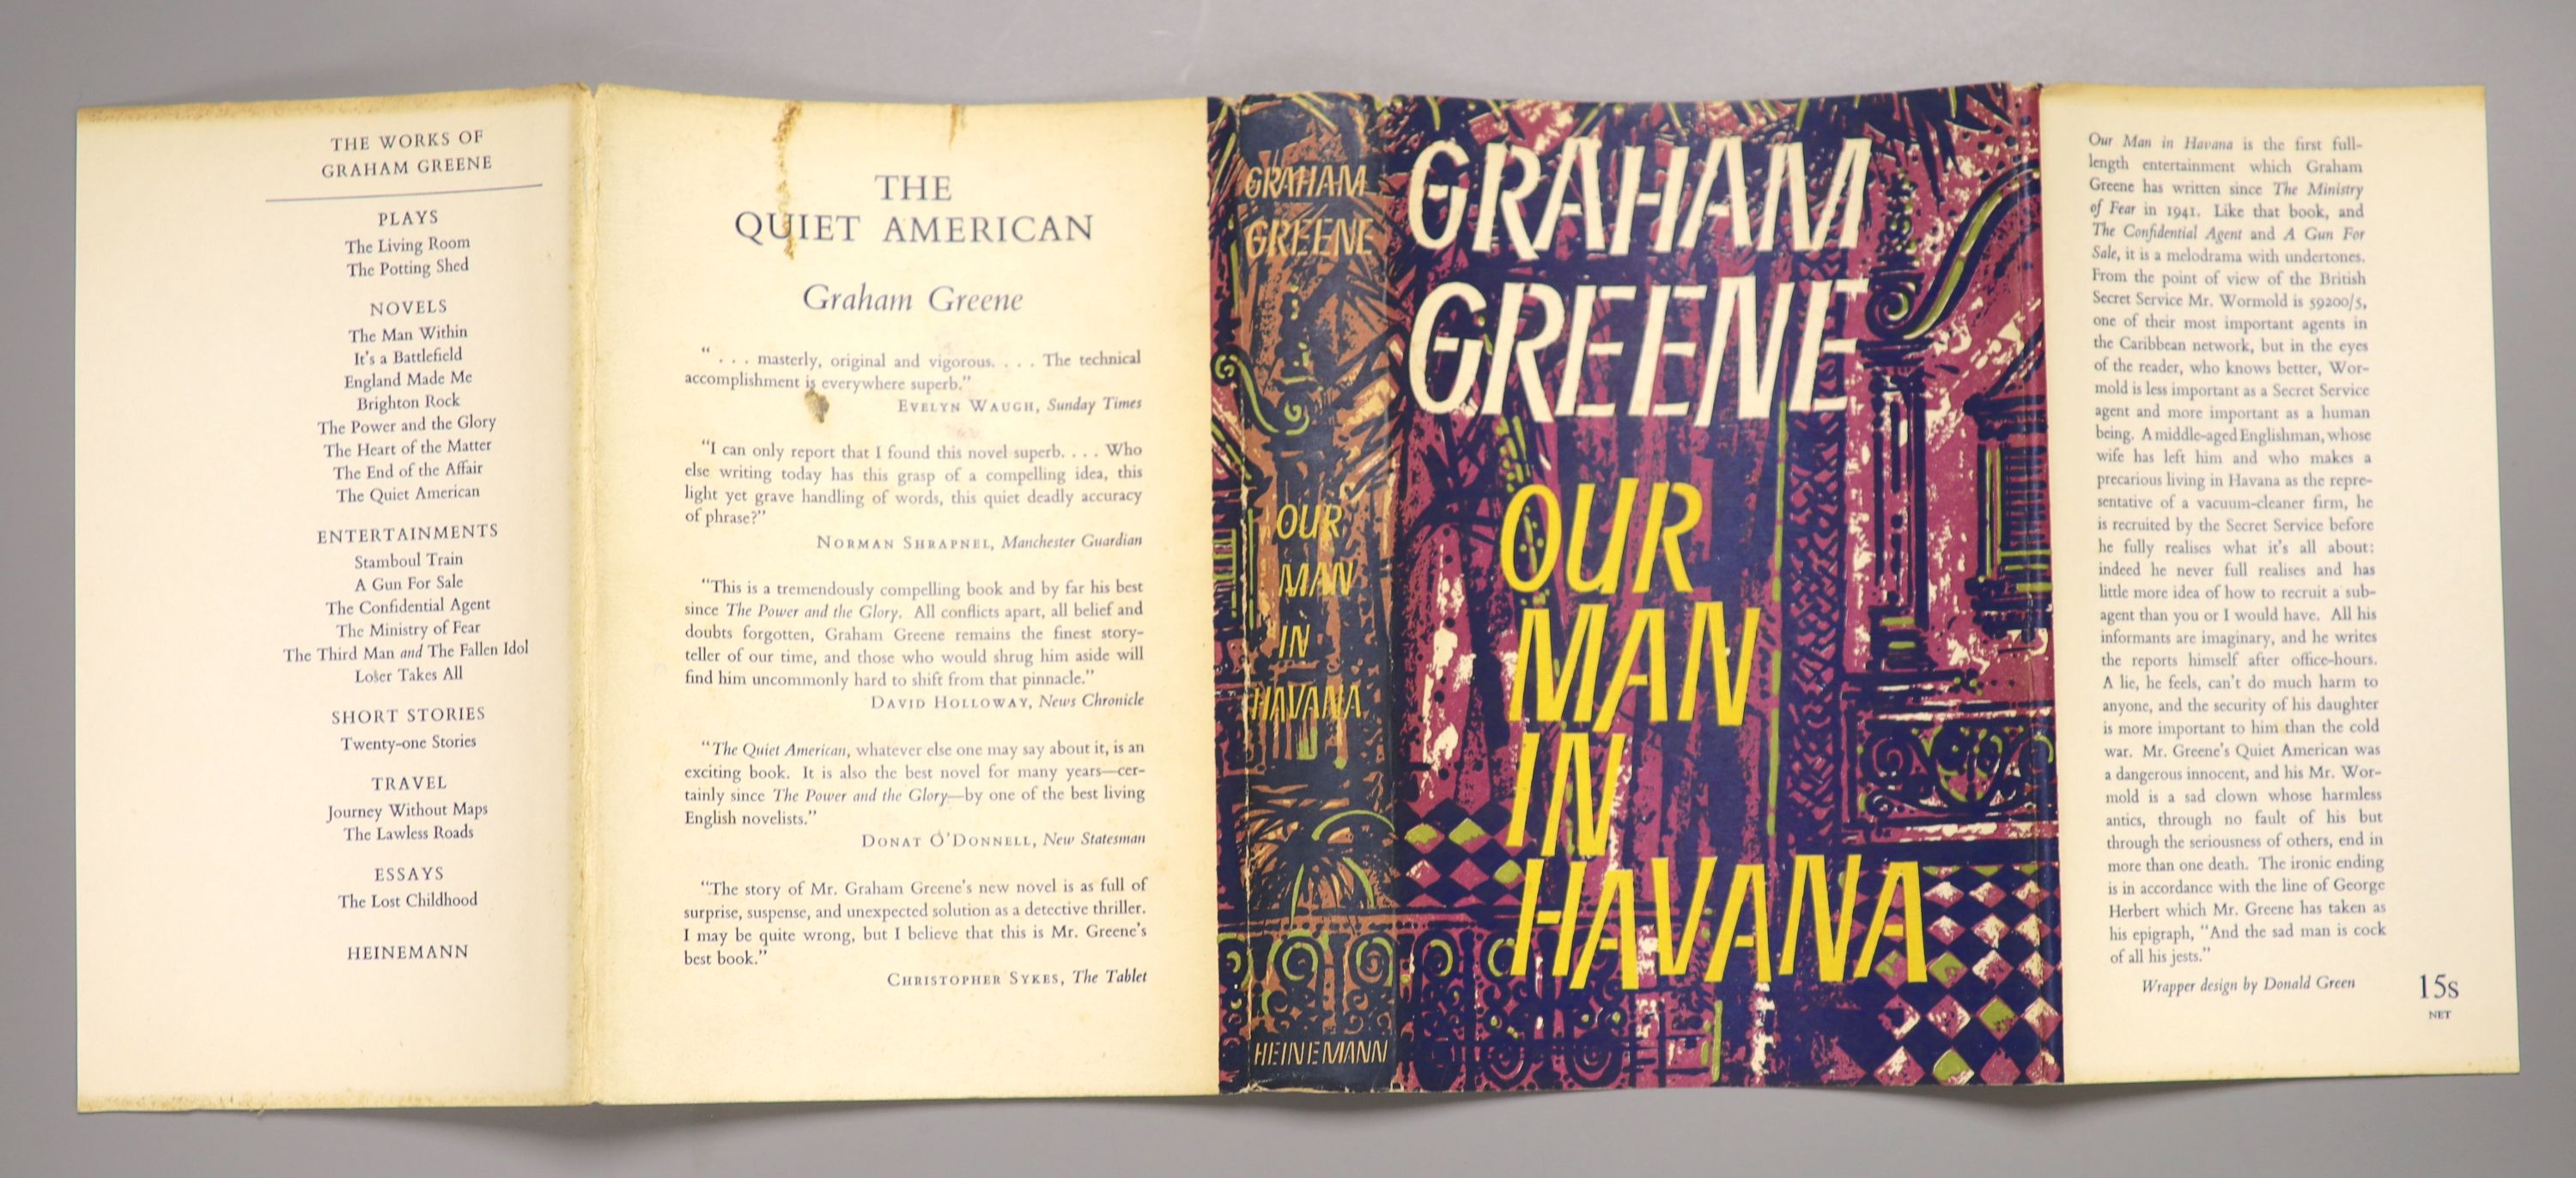 Greene, Graham - Our Man in Havana, 1st edition, in original blue cloth with unclipped d/j, soiled on rear panel, William Heinemann, London, 1958